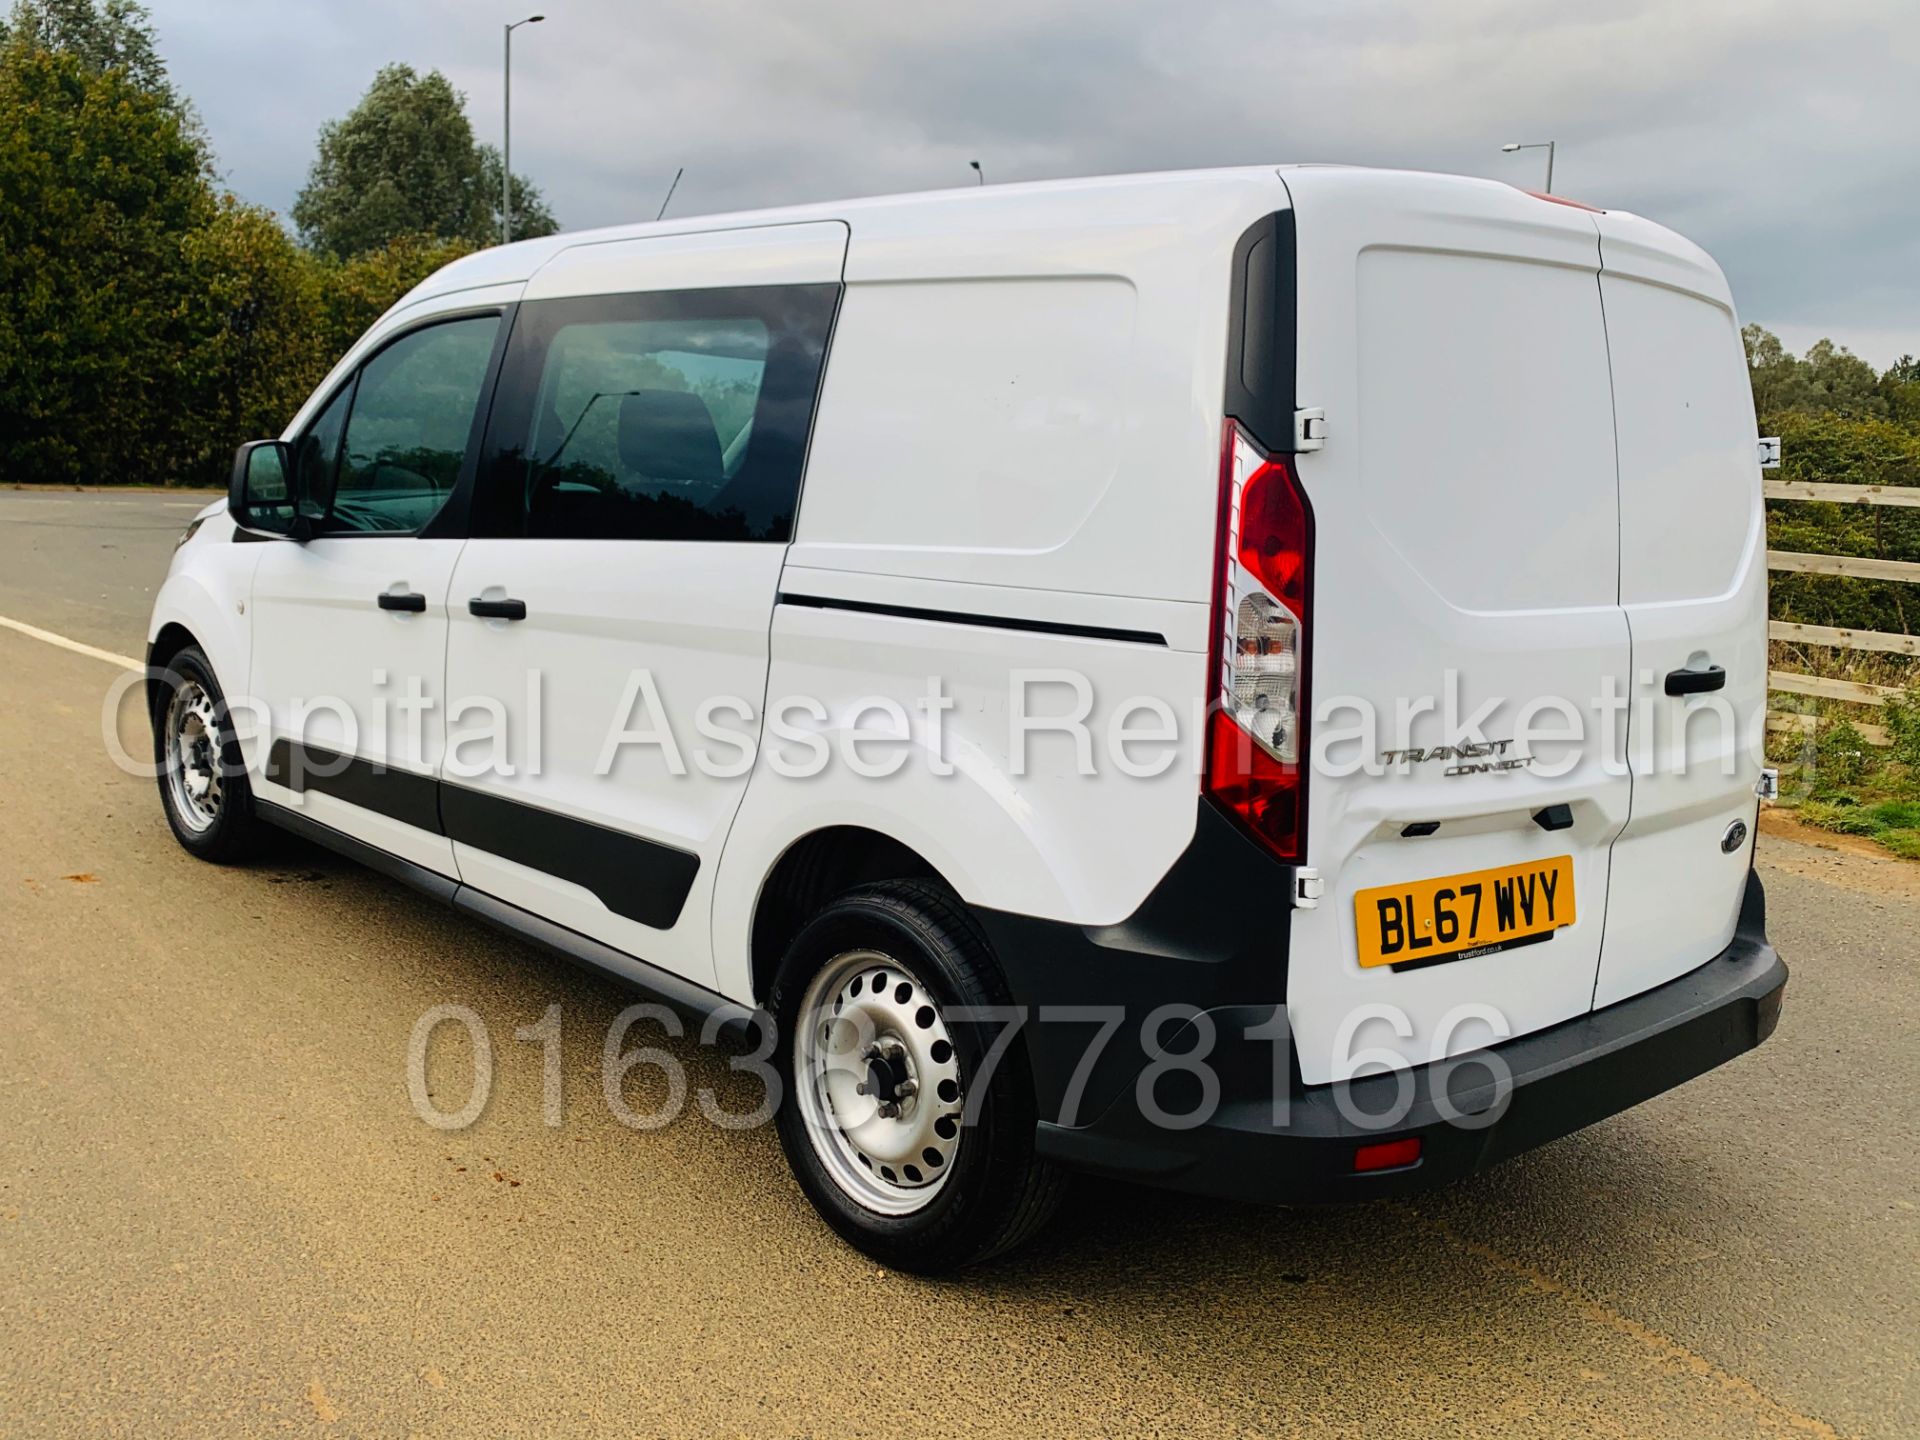 ON SALE FORD TRANSIT CONNECT *LWB- 5 SEATER CREW VAN* (2018 - EURO 6) 1.5 TDCI *AIR CON* (1 OWNER) - Image 10 of 45